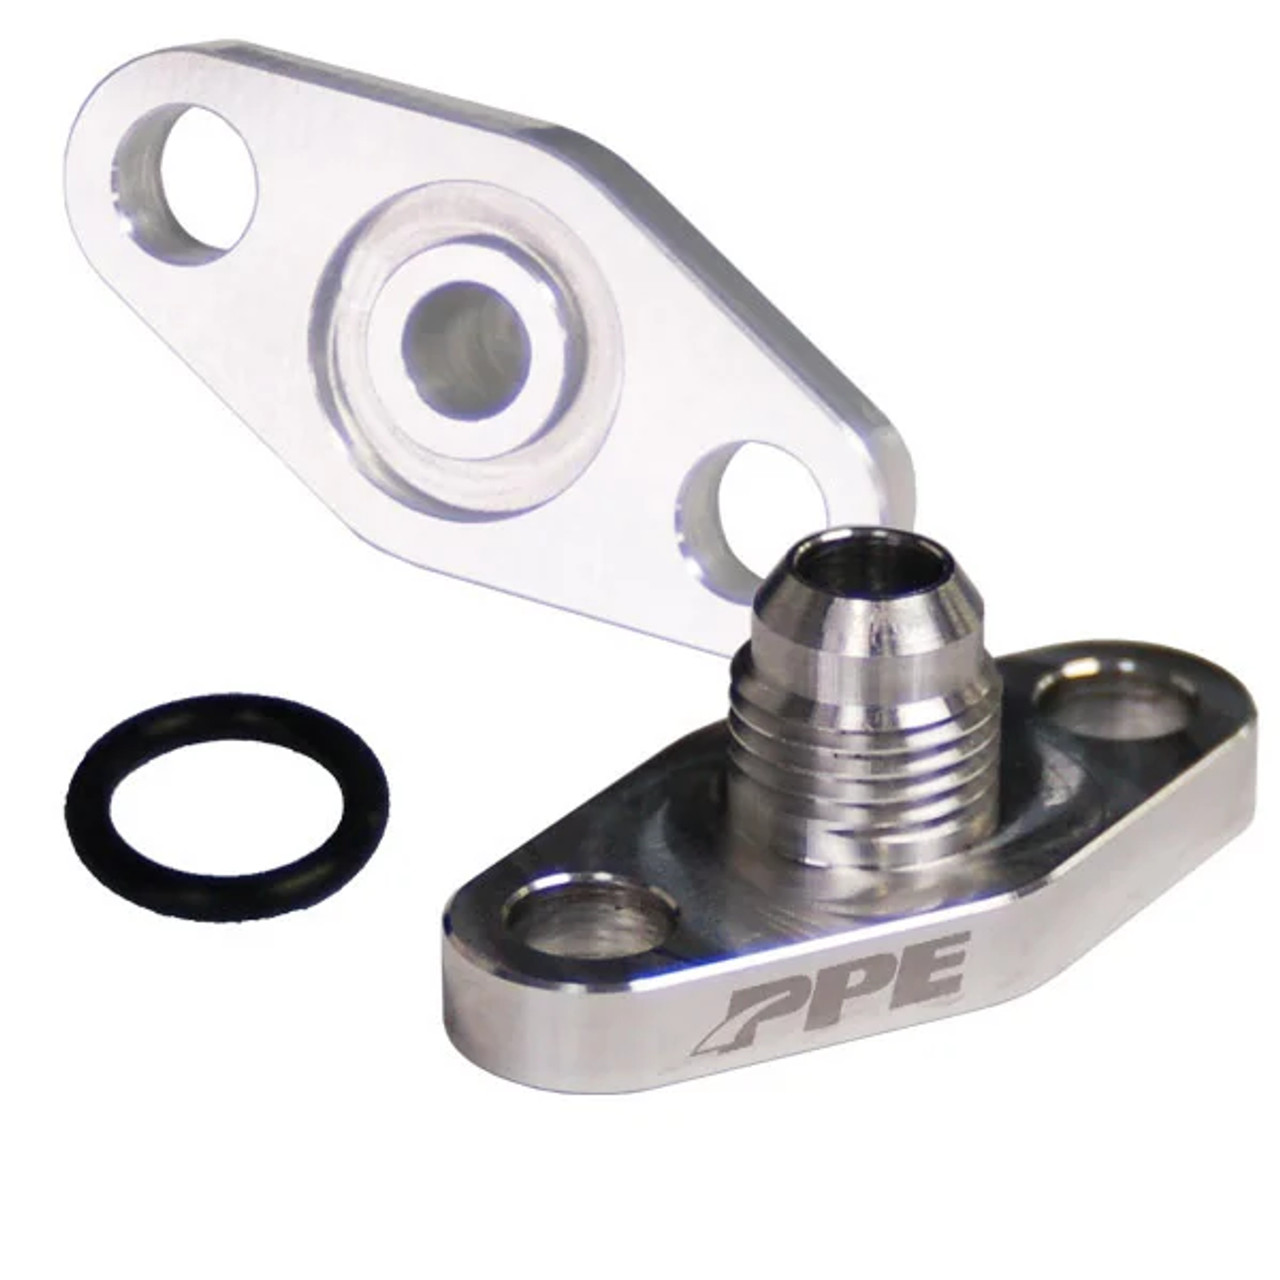 PPE T4 OIL FEED LINE ADAPTER FITS MANY T4 TURBOCHARGERS (PPE516001000)